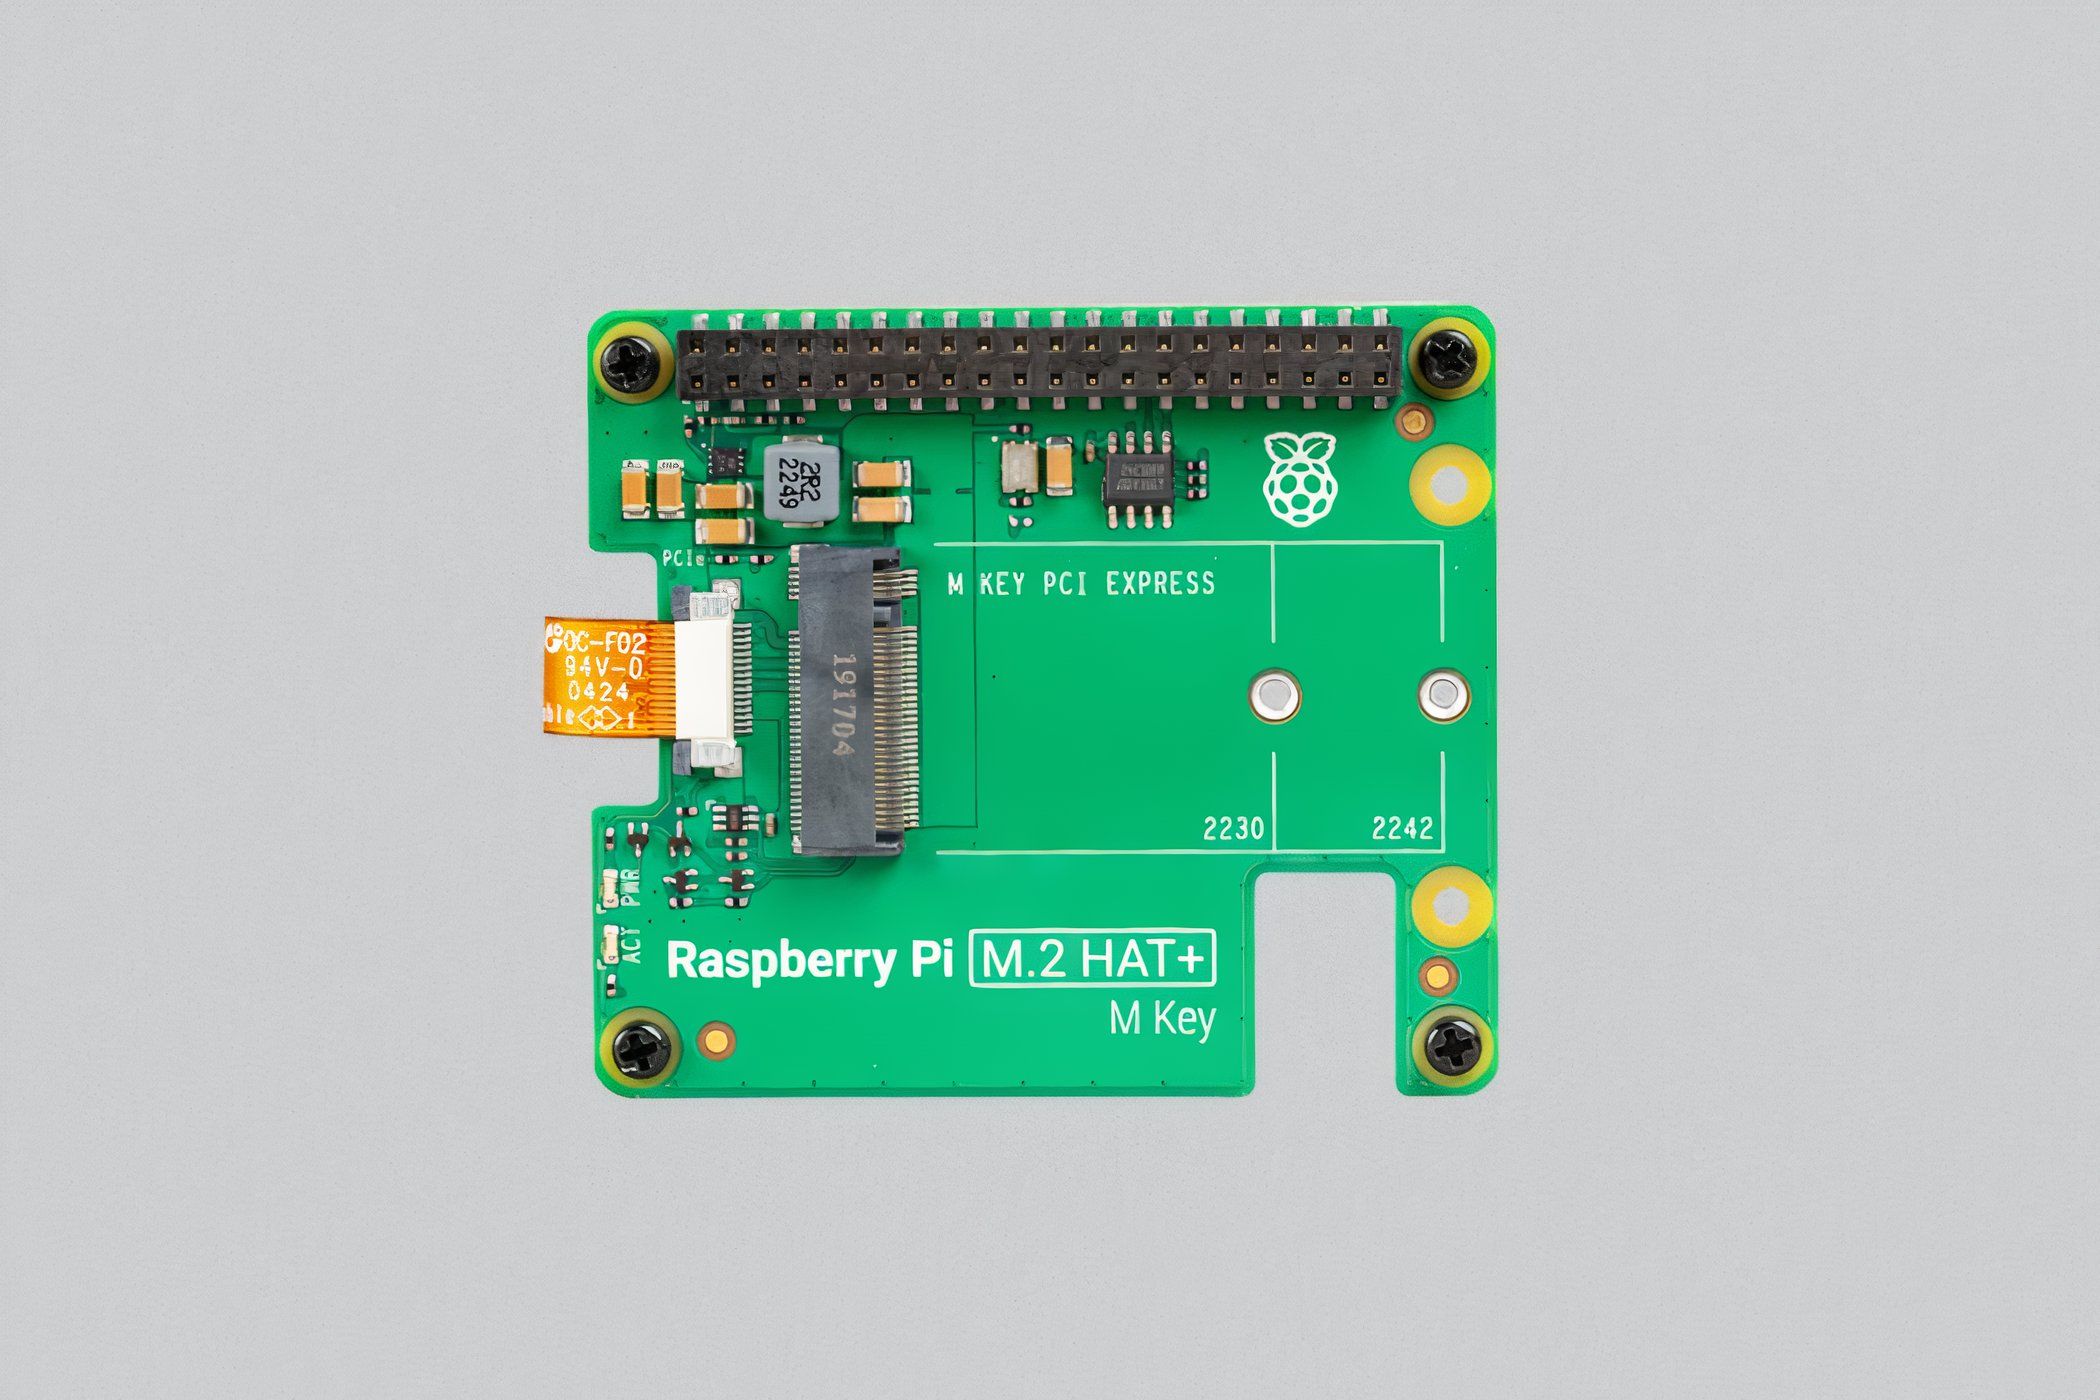 M.2 HAT+ for the Raspberry Pi 5